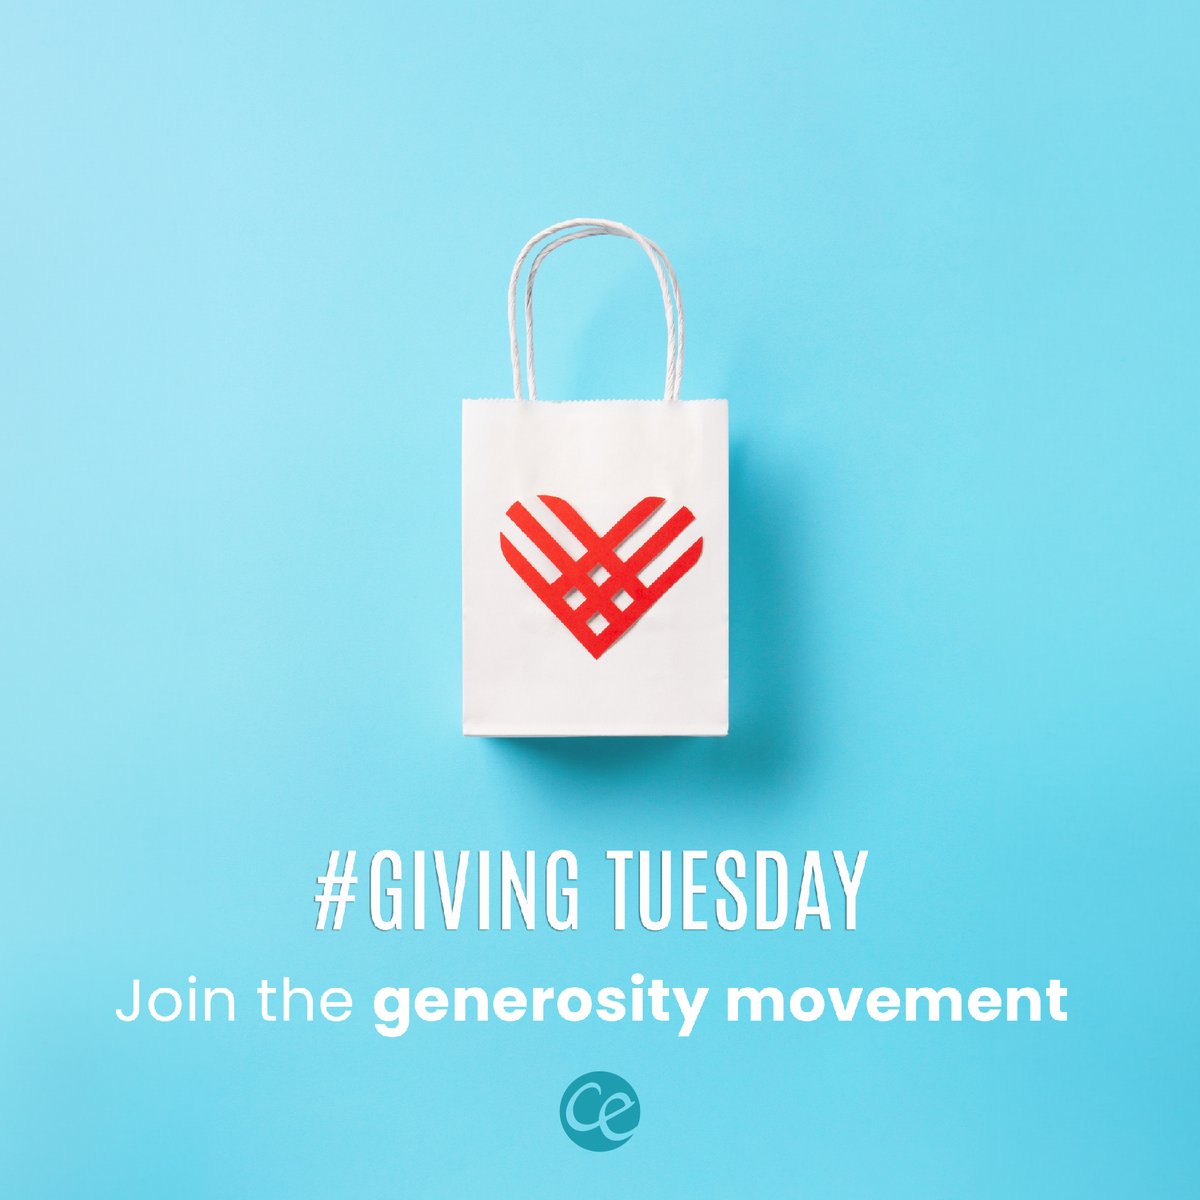 While the holiday season is in full swing, let’s remember to give back to those in need and make a difference in our communities. Every act of kindness counts!

#GivingTuesday #GiveBack #CE #promotionalproductswork #getintouch